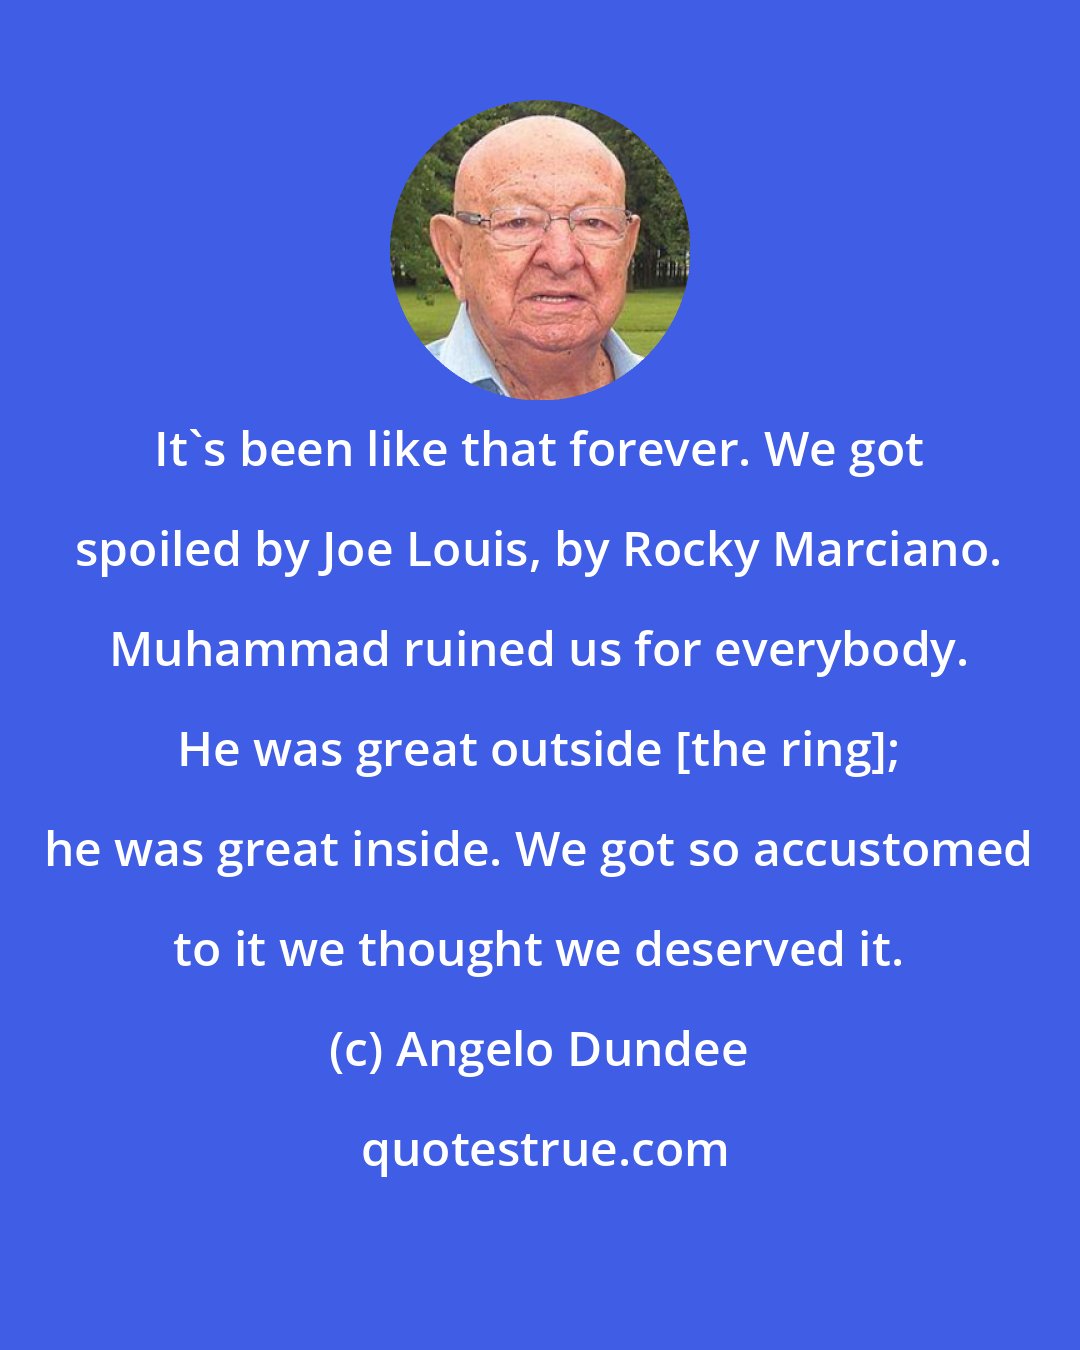 Angelo Dundee: It's been like that forever. We got spoiled by Joe Louis, by Rocky Marciano. Muhammad ruined us for everybody. He was great outside [the ring]; he was great inside. We got so accustomed to it we thought we deserved it.